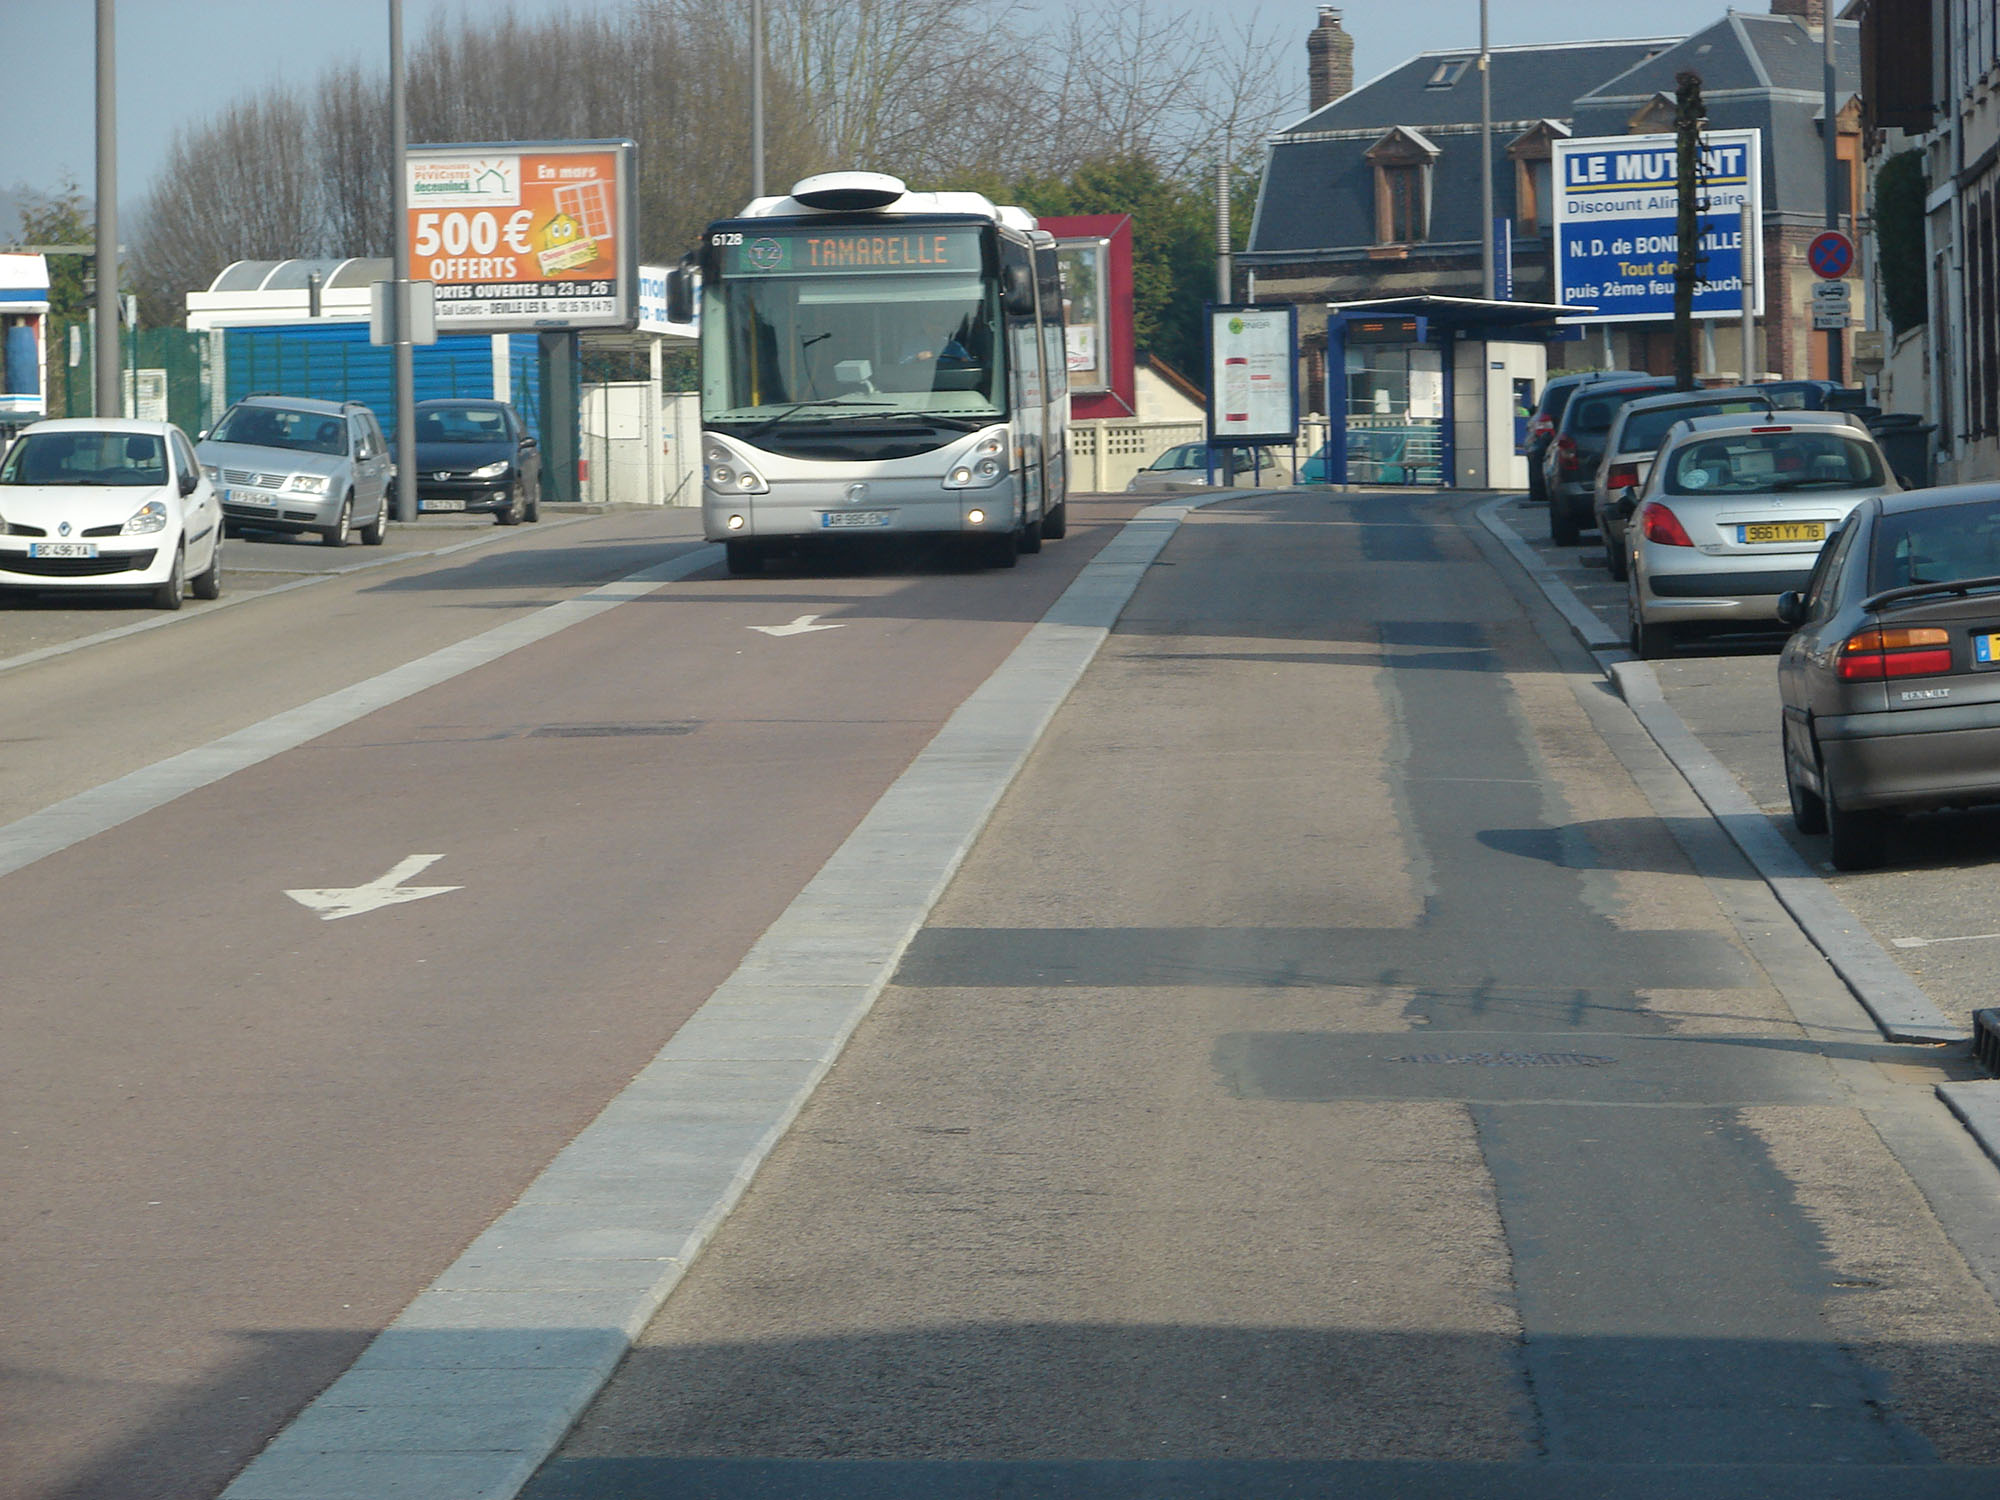 Fig. 22.43 The virtual lane concept in Rouen, France, where a single centrally located bus lane is used to provide bus priority in both directions of travel.